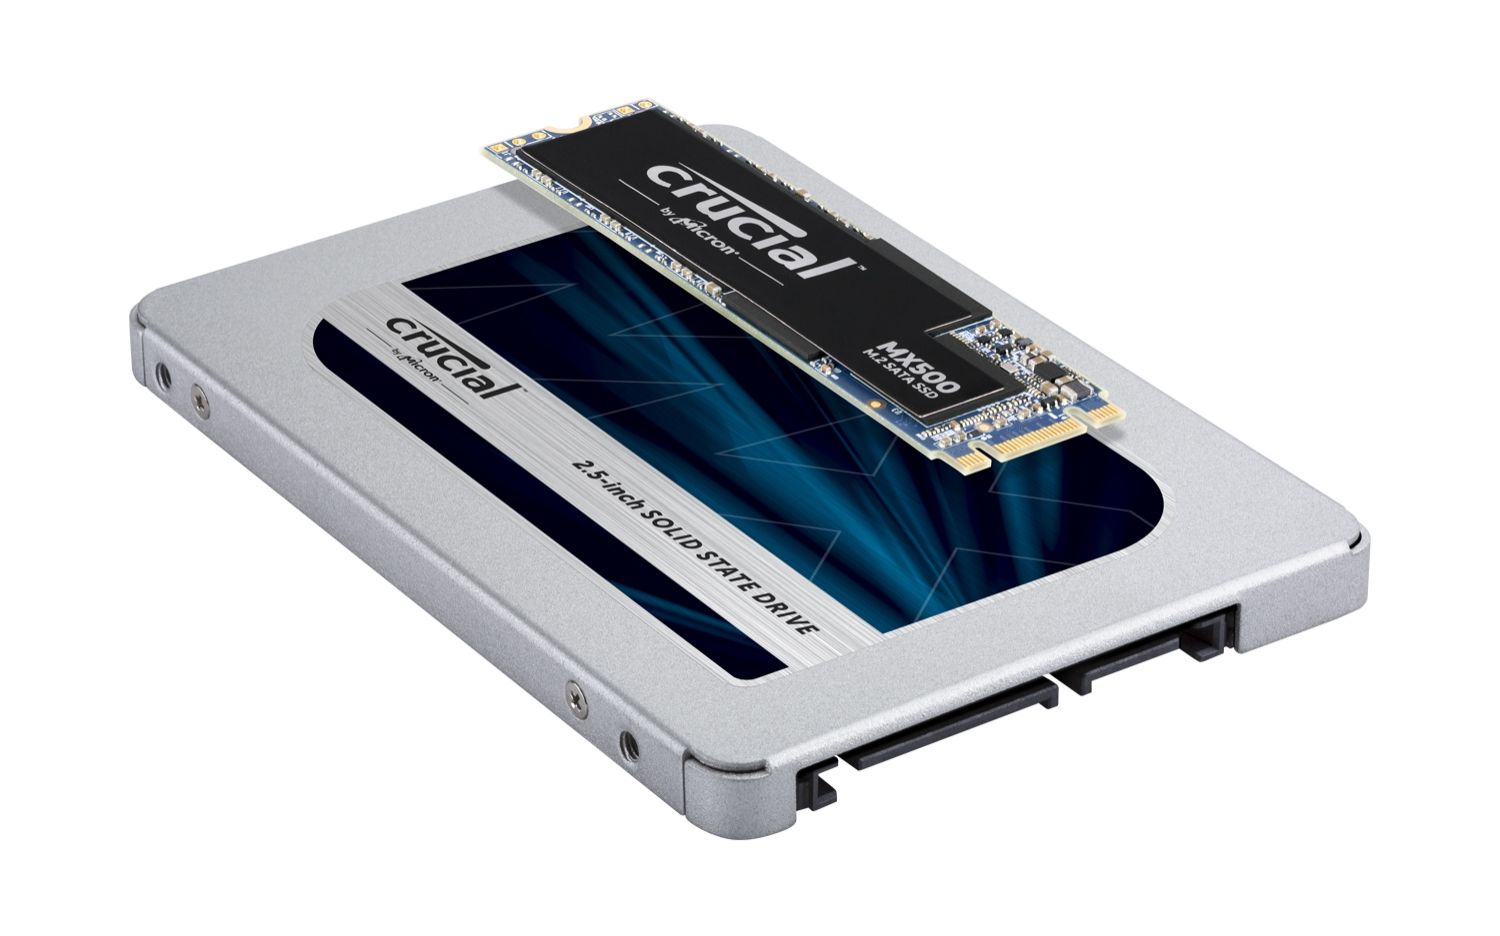 Crucial Solid State Drives.